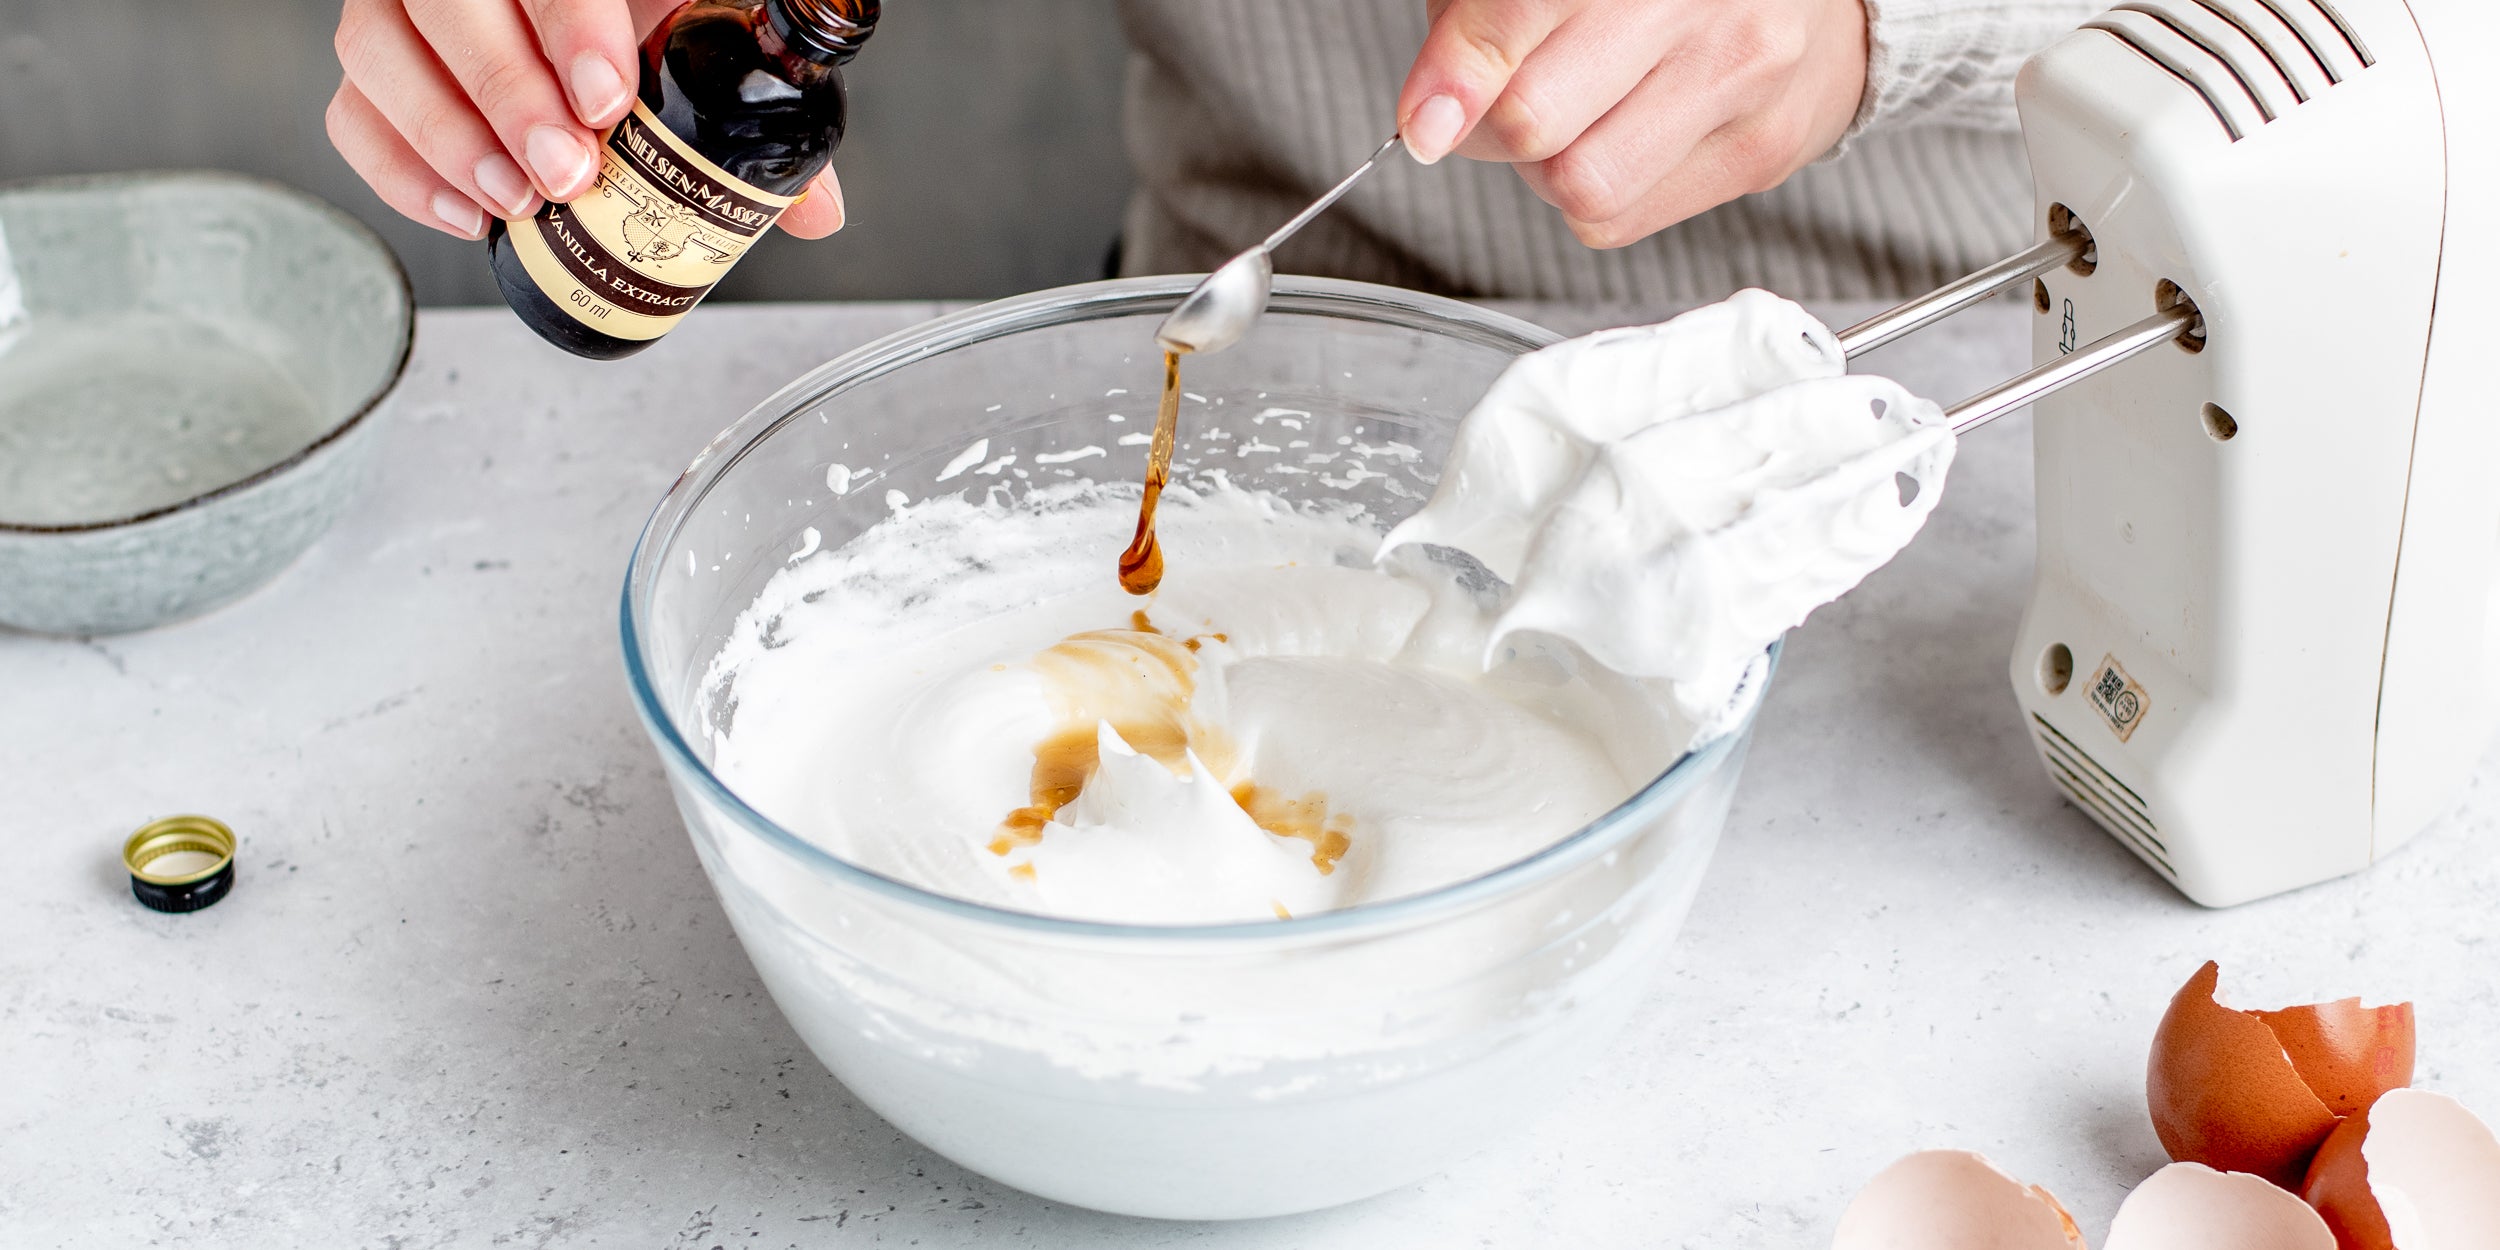 Meringues mid-whisk adding a generous drizzle of Nielsen-Massey Vanilla extract to the mixture